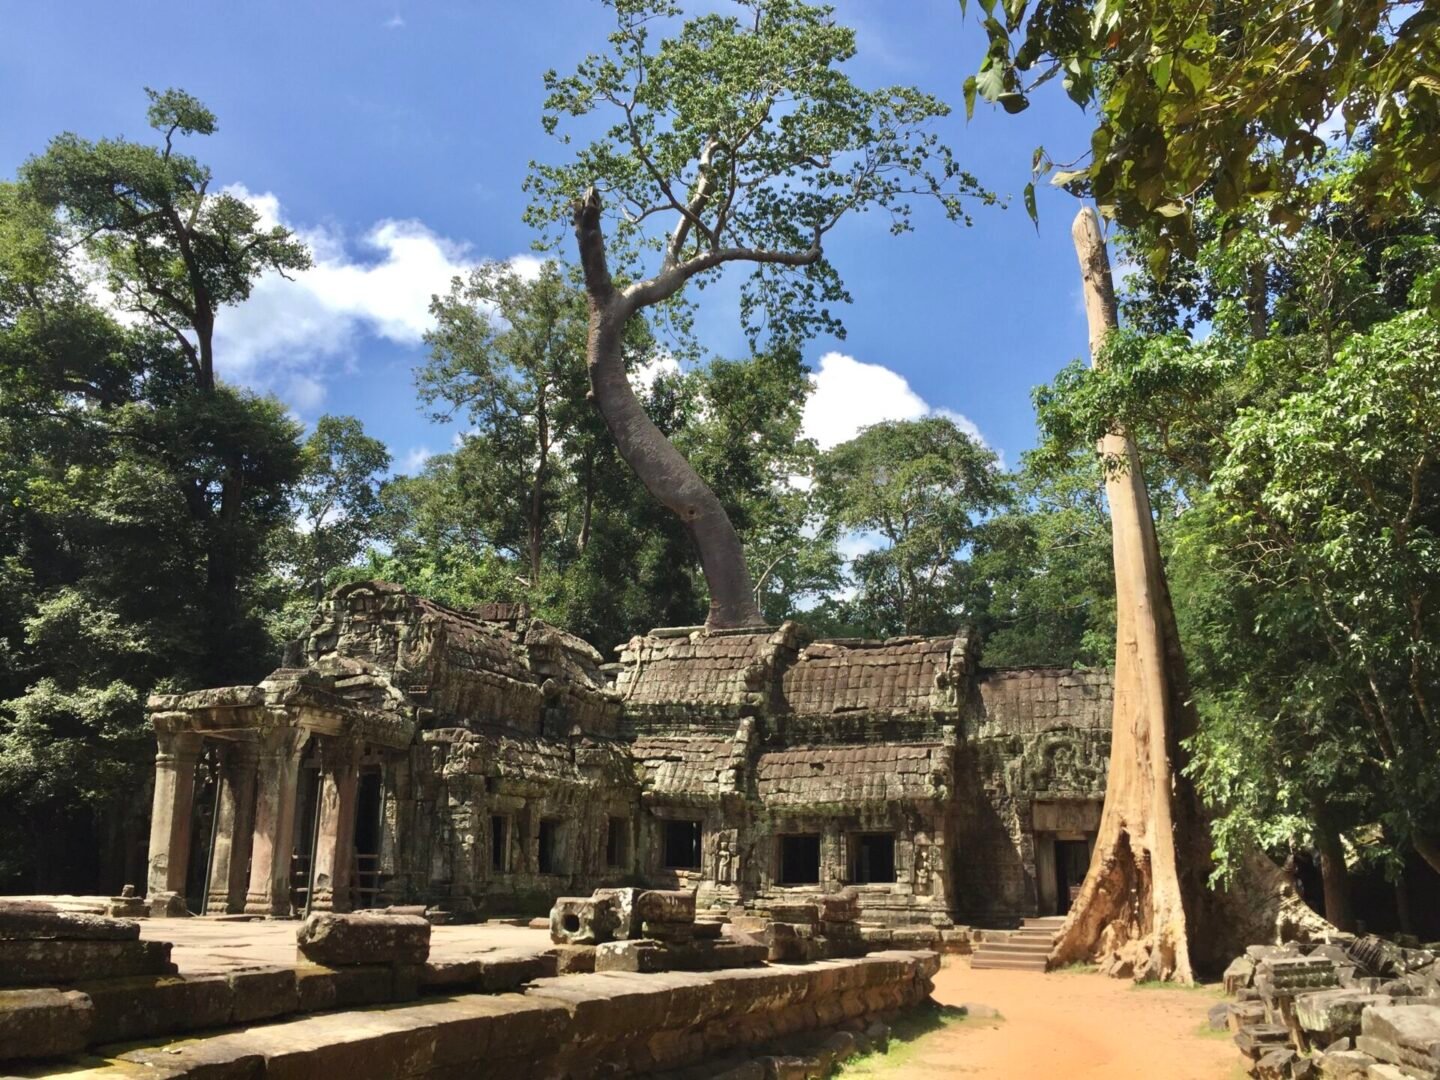 Which Temples to go to in Siem Reap